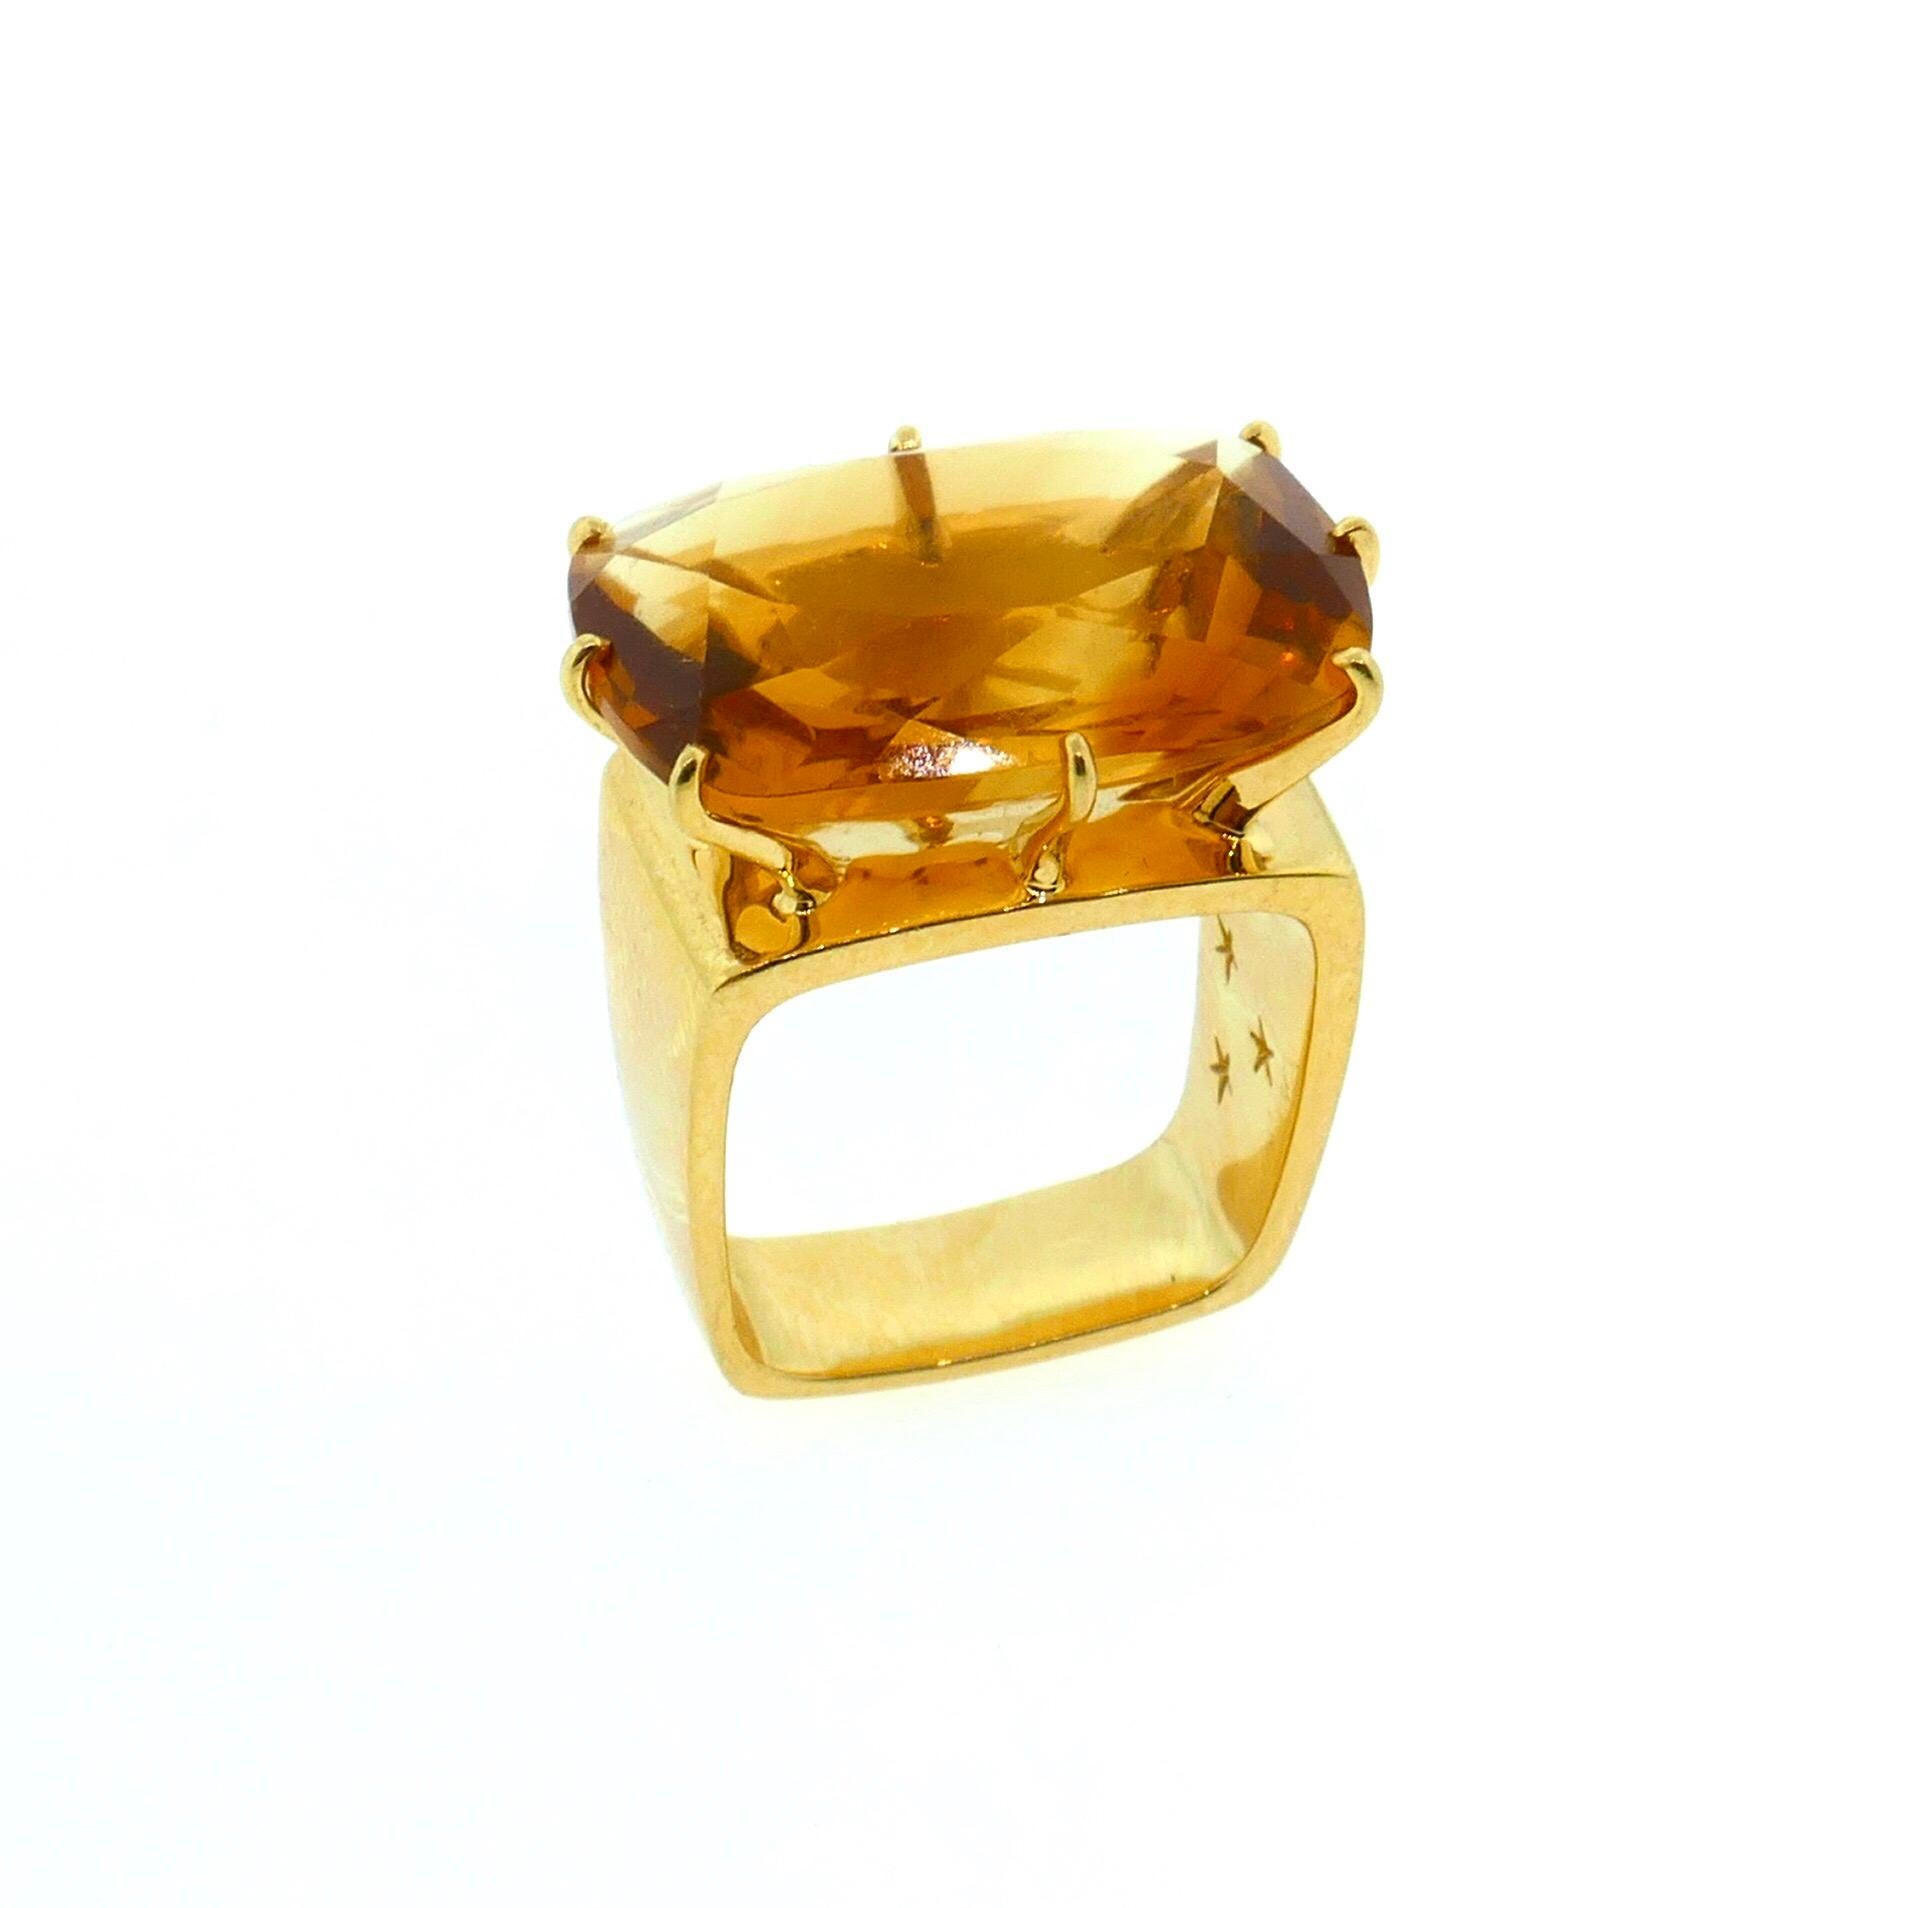 French Modernist Square Shape Yellow Gold, Diamond and Citrine Ring 1